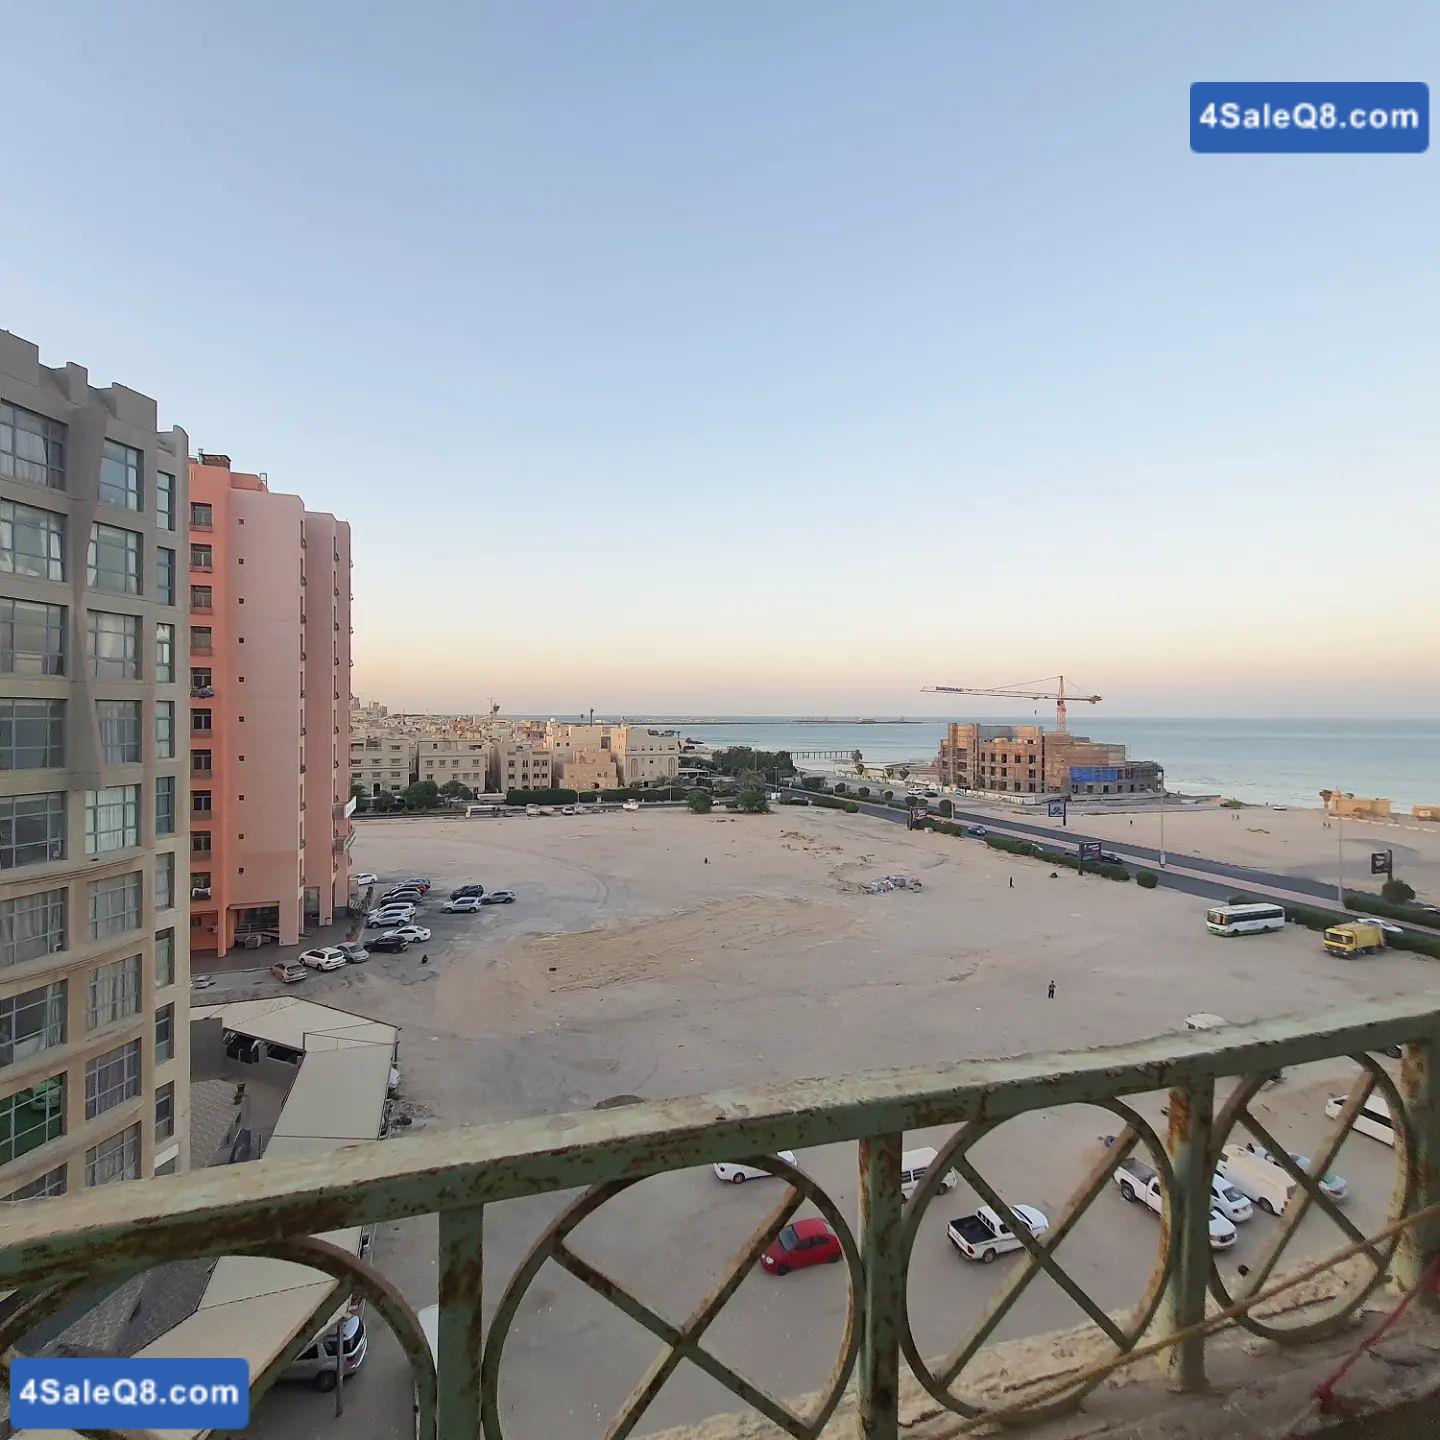 155 apartments for rent in Mangaf